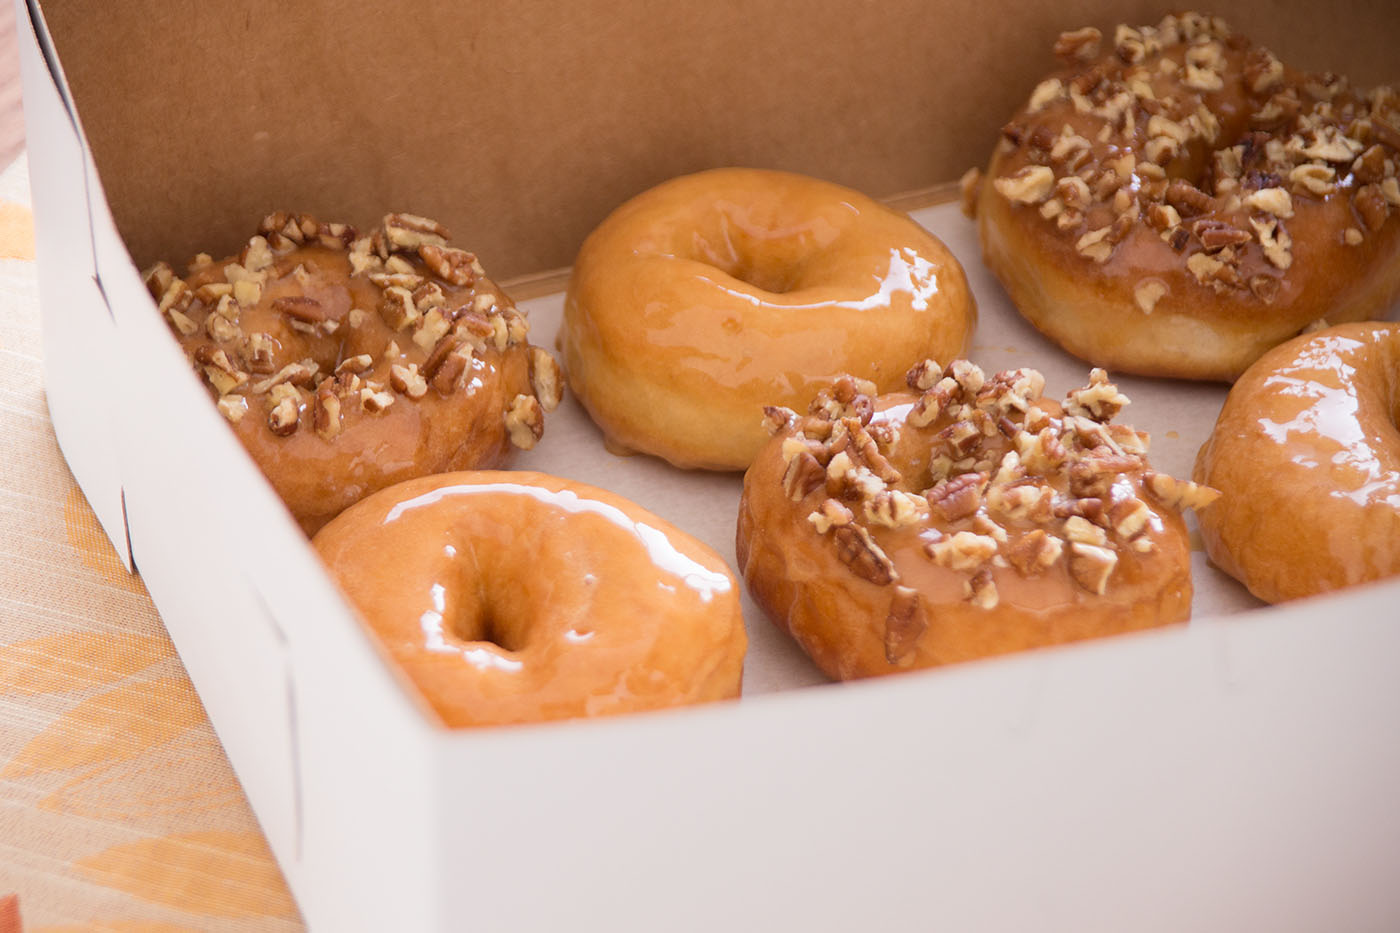 Opened box of donuts.